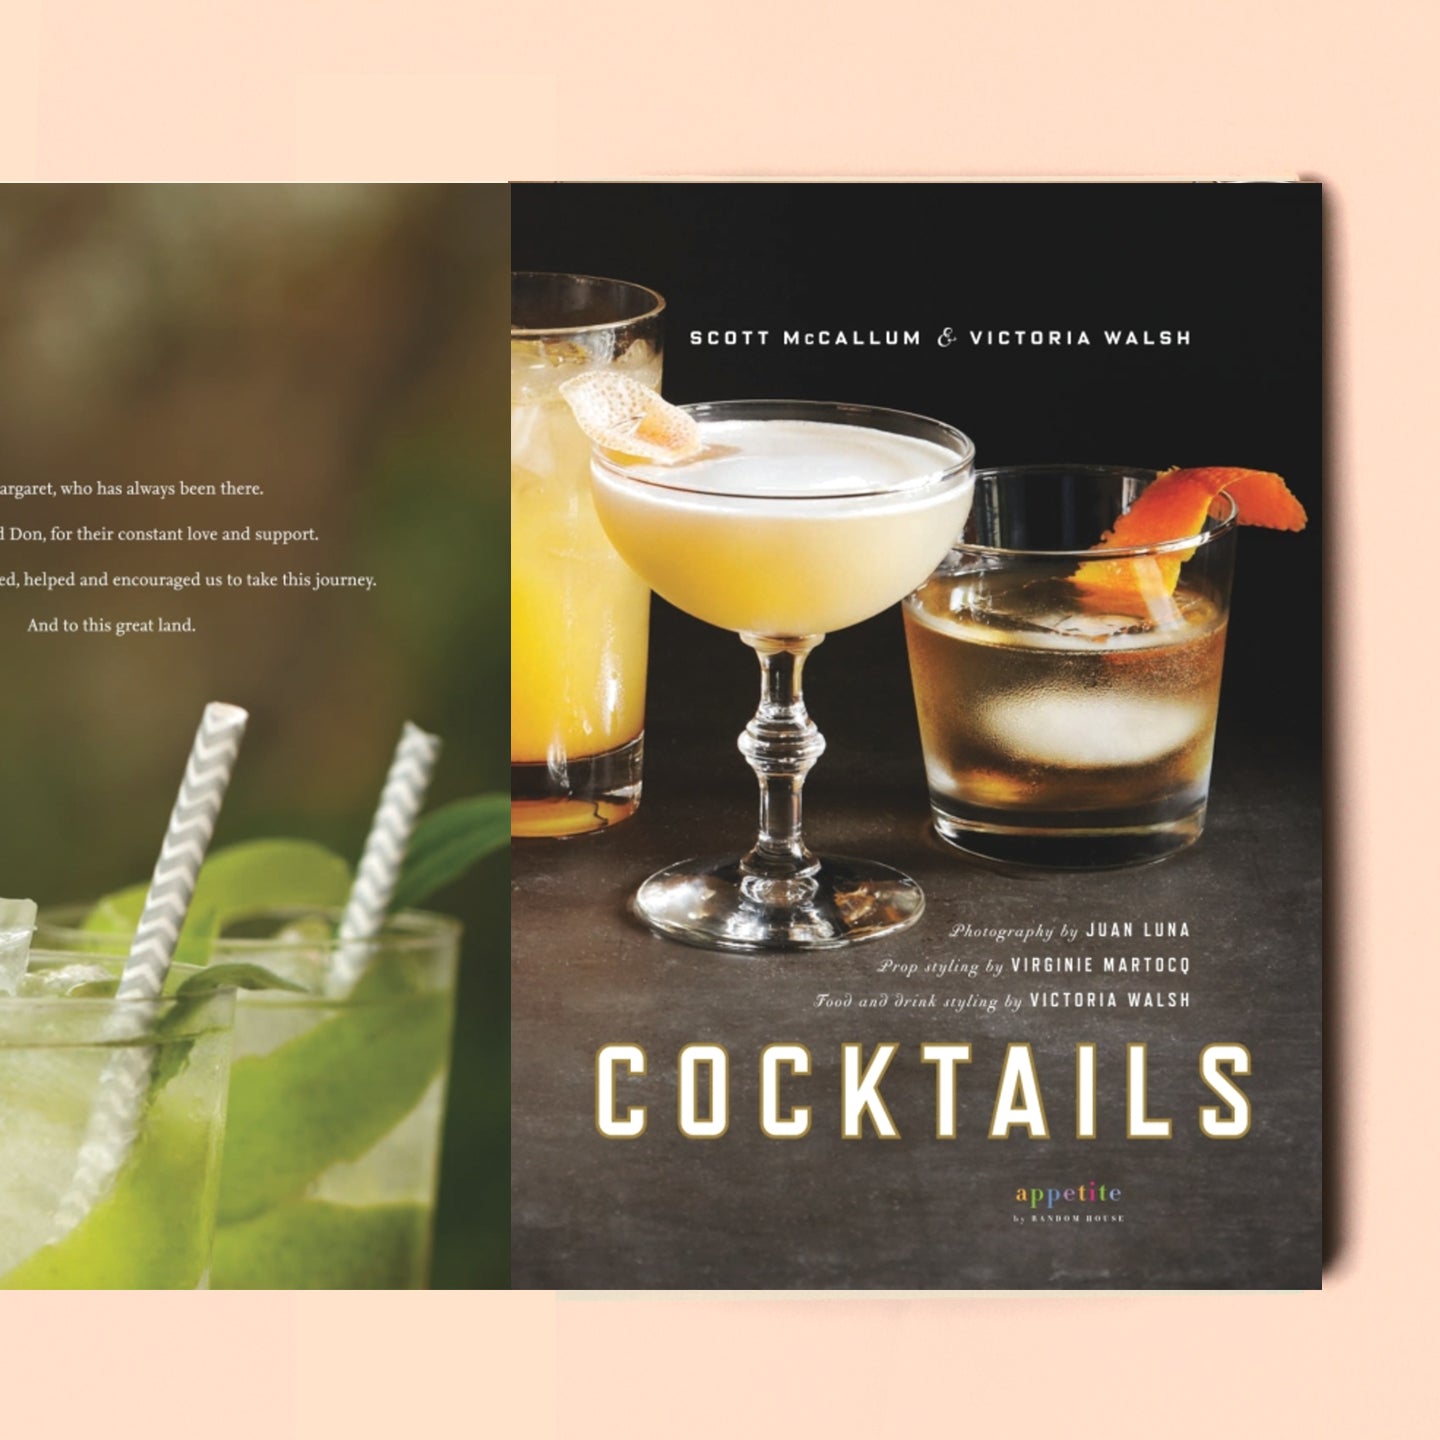 A Field Guide to Canadian Cocktails